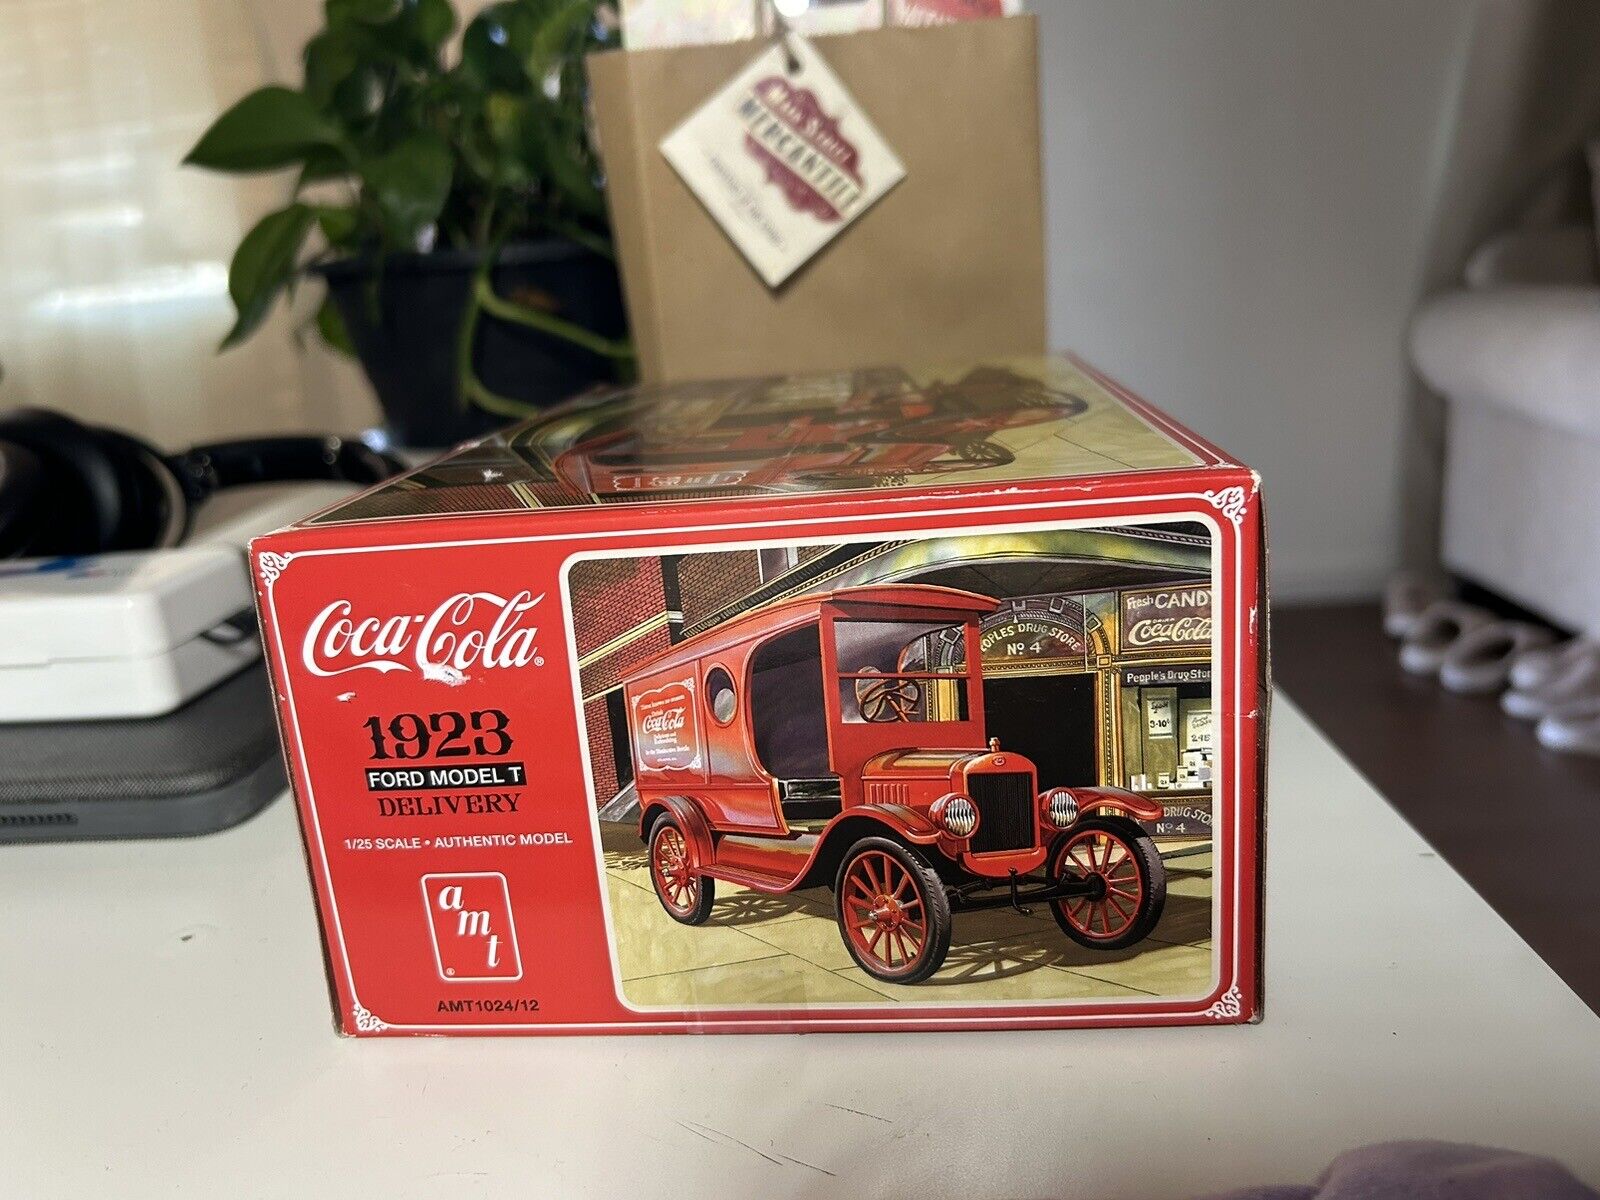 COCA COLA AMT 1024 1923 MODEL T FORD DELIVERY TRUCK KIT